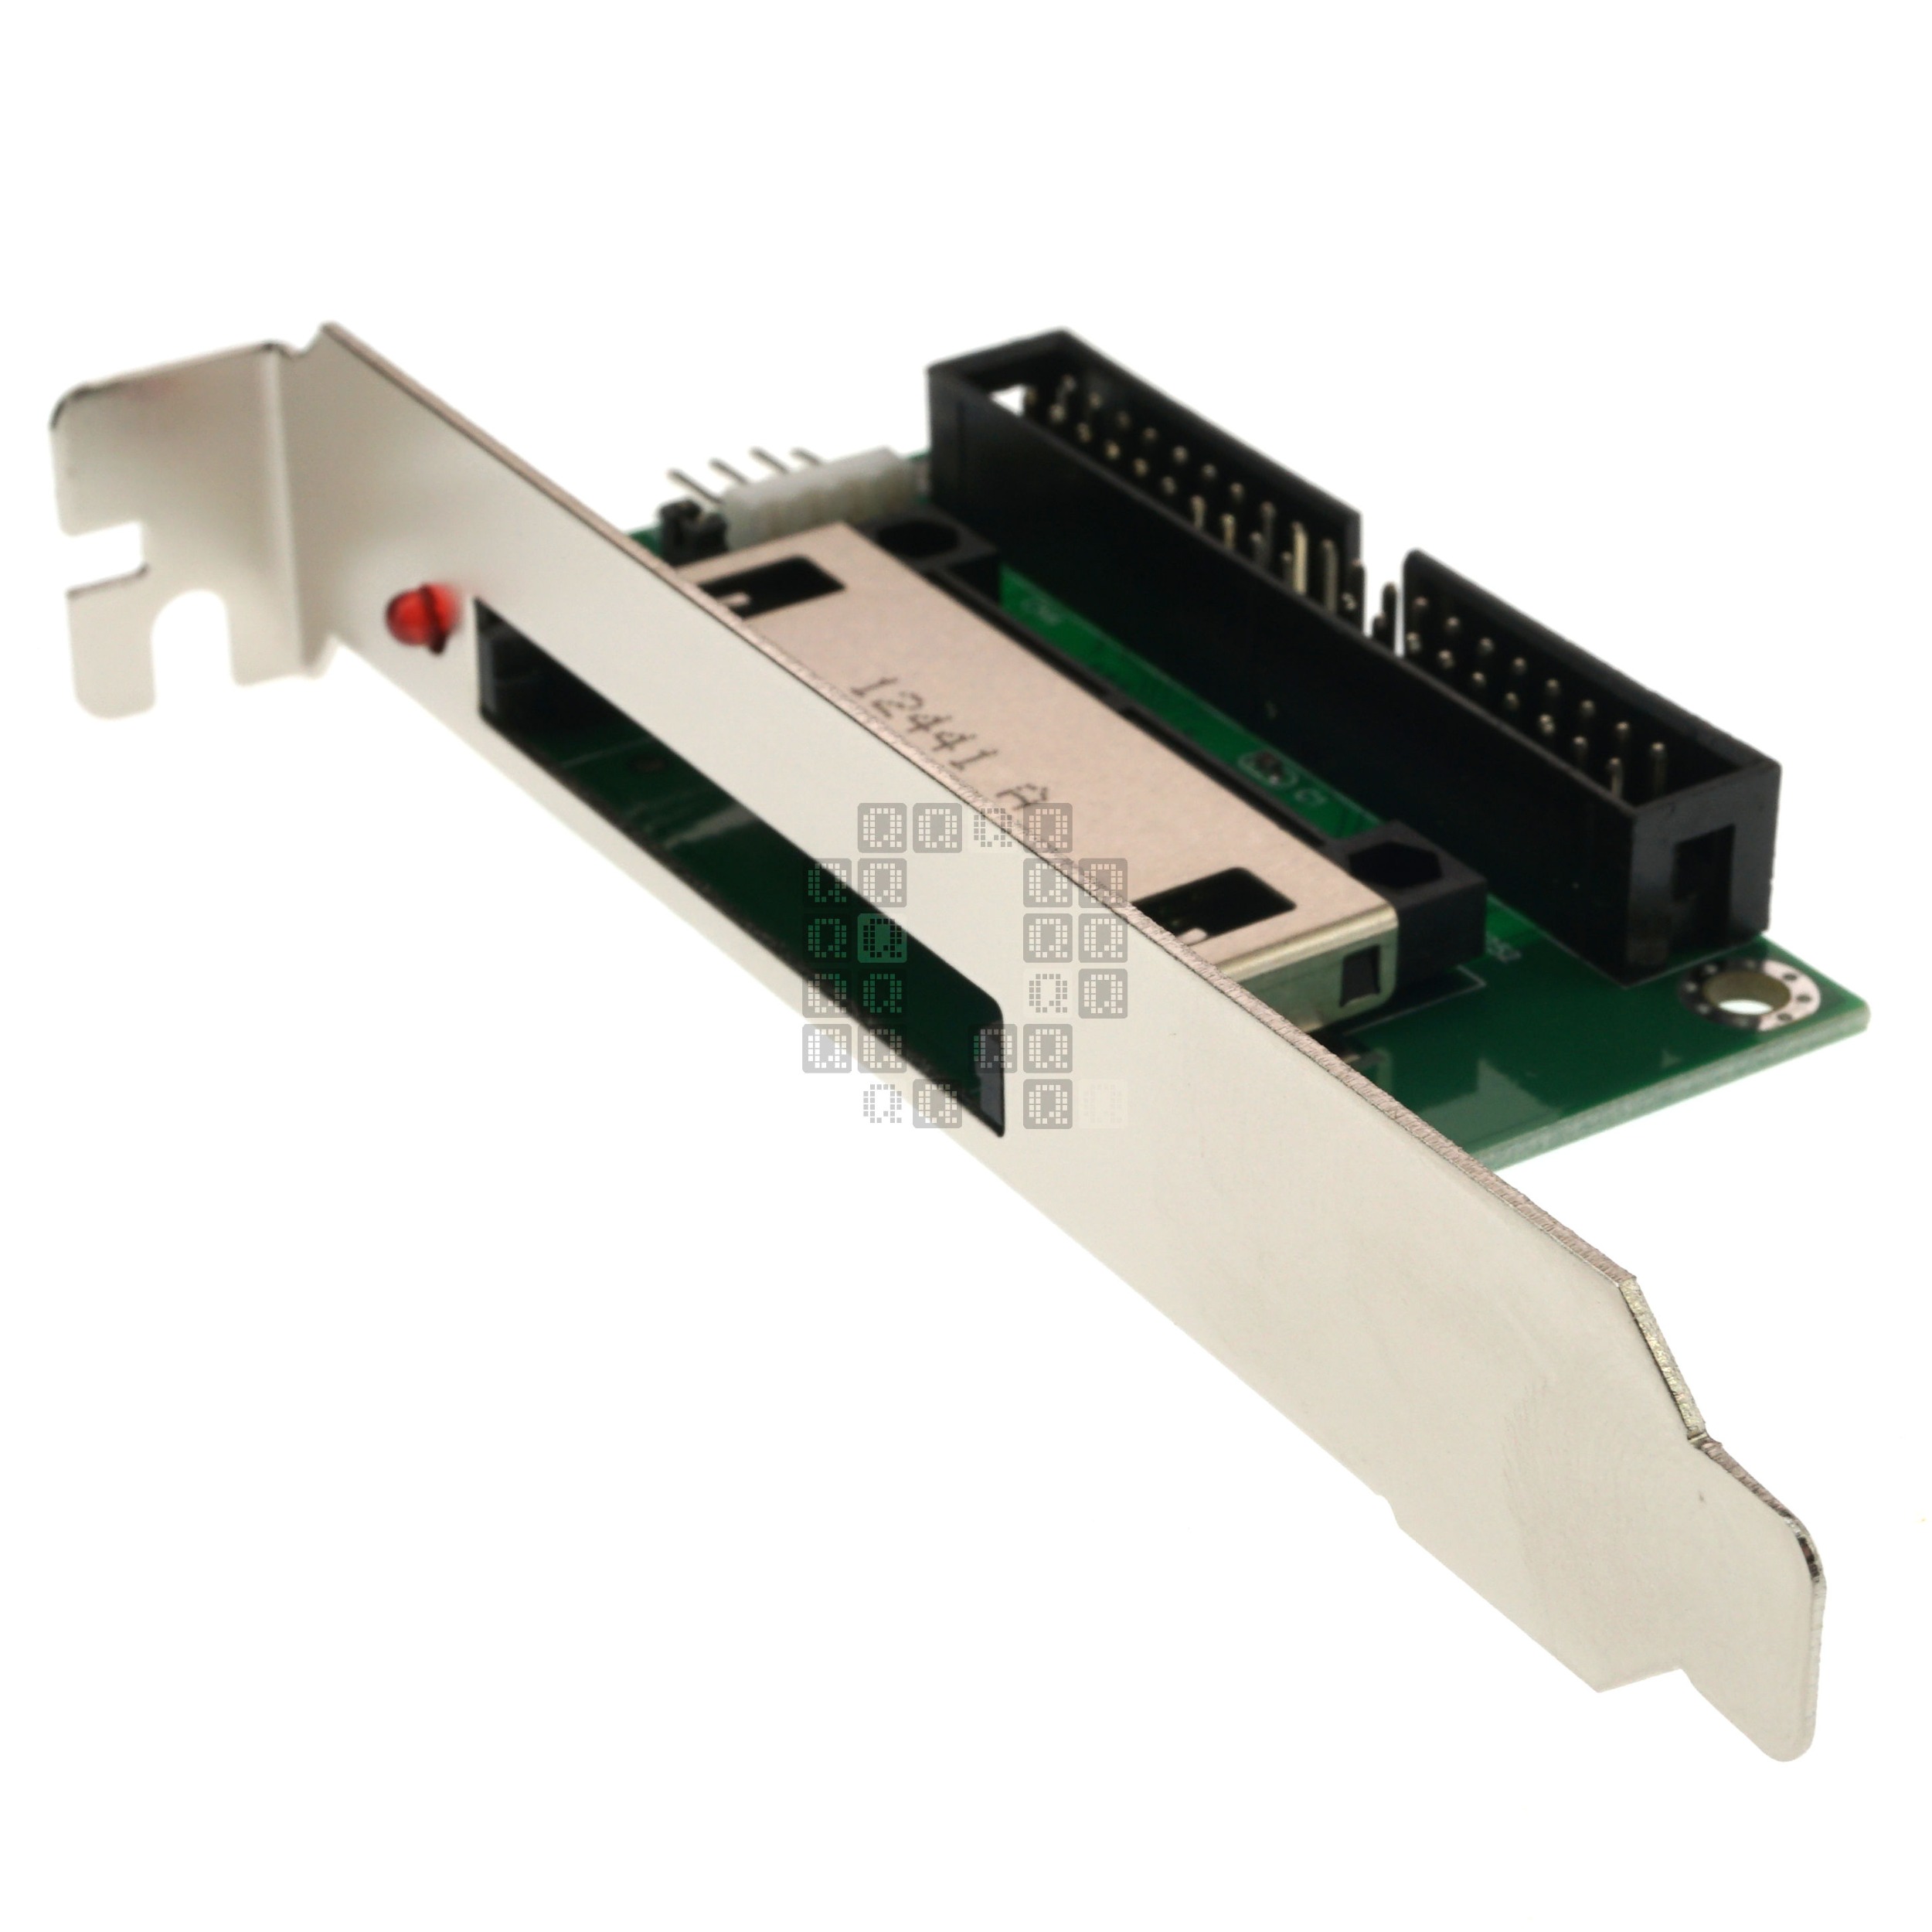 40-Pin IDE to Compact Flash Card Adapter, PCI Slot Cover